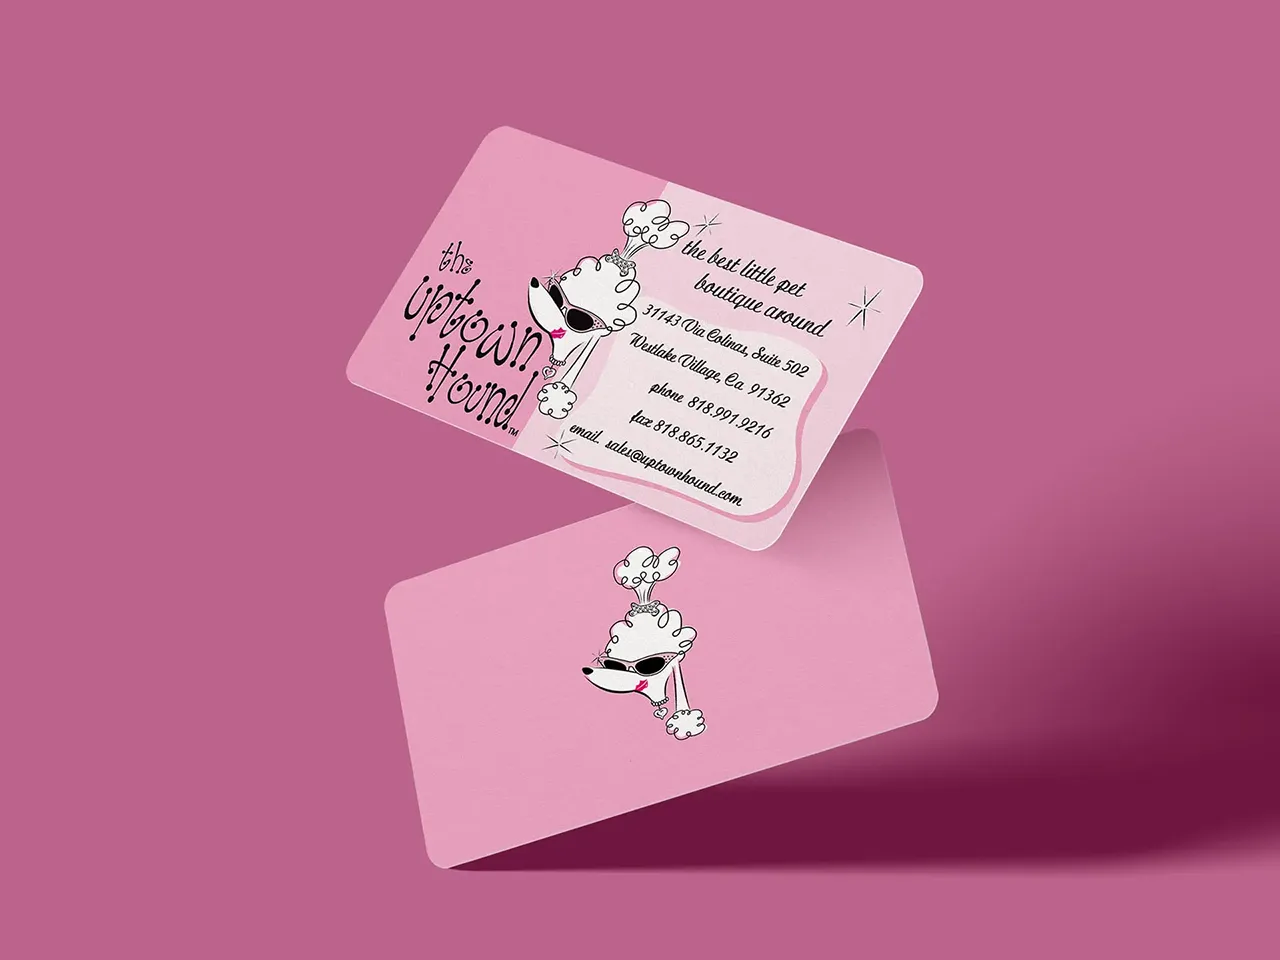 Uptown Hound business cards pink retro style